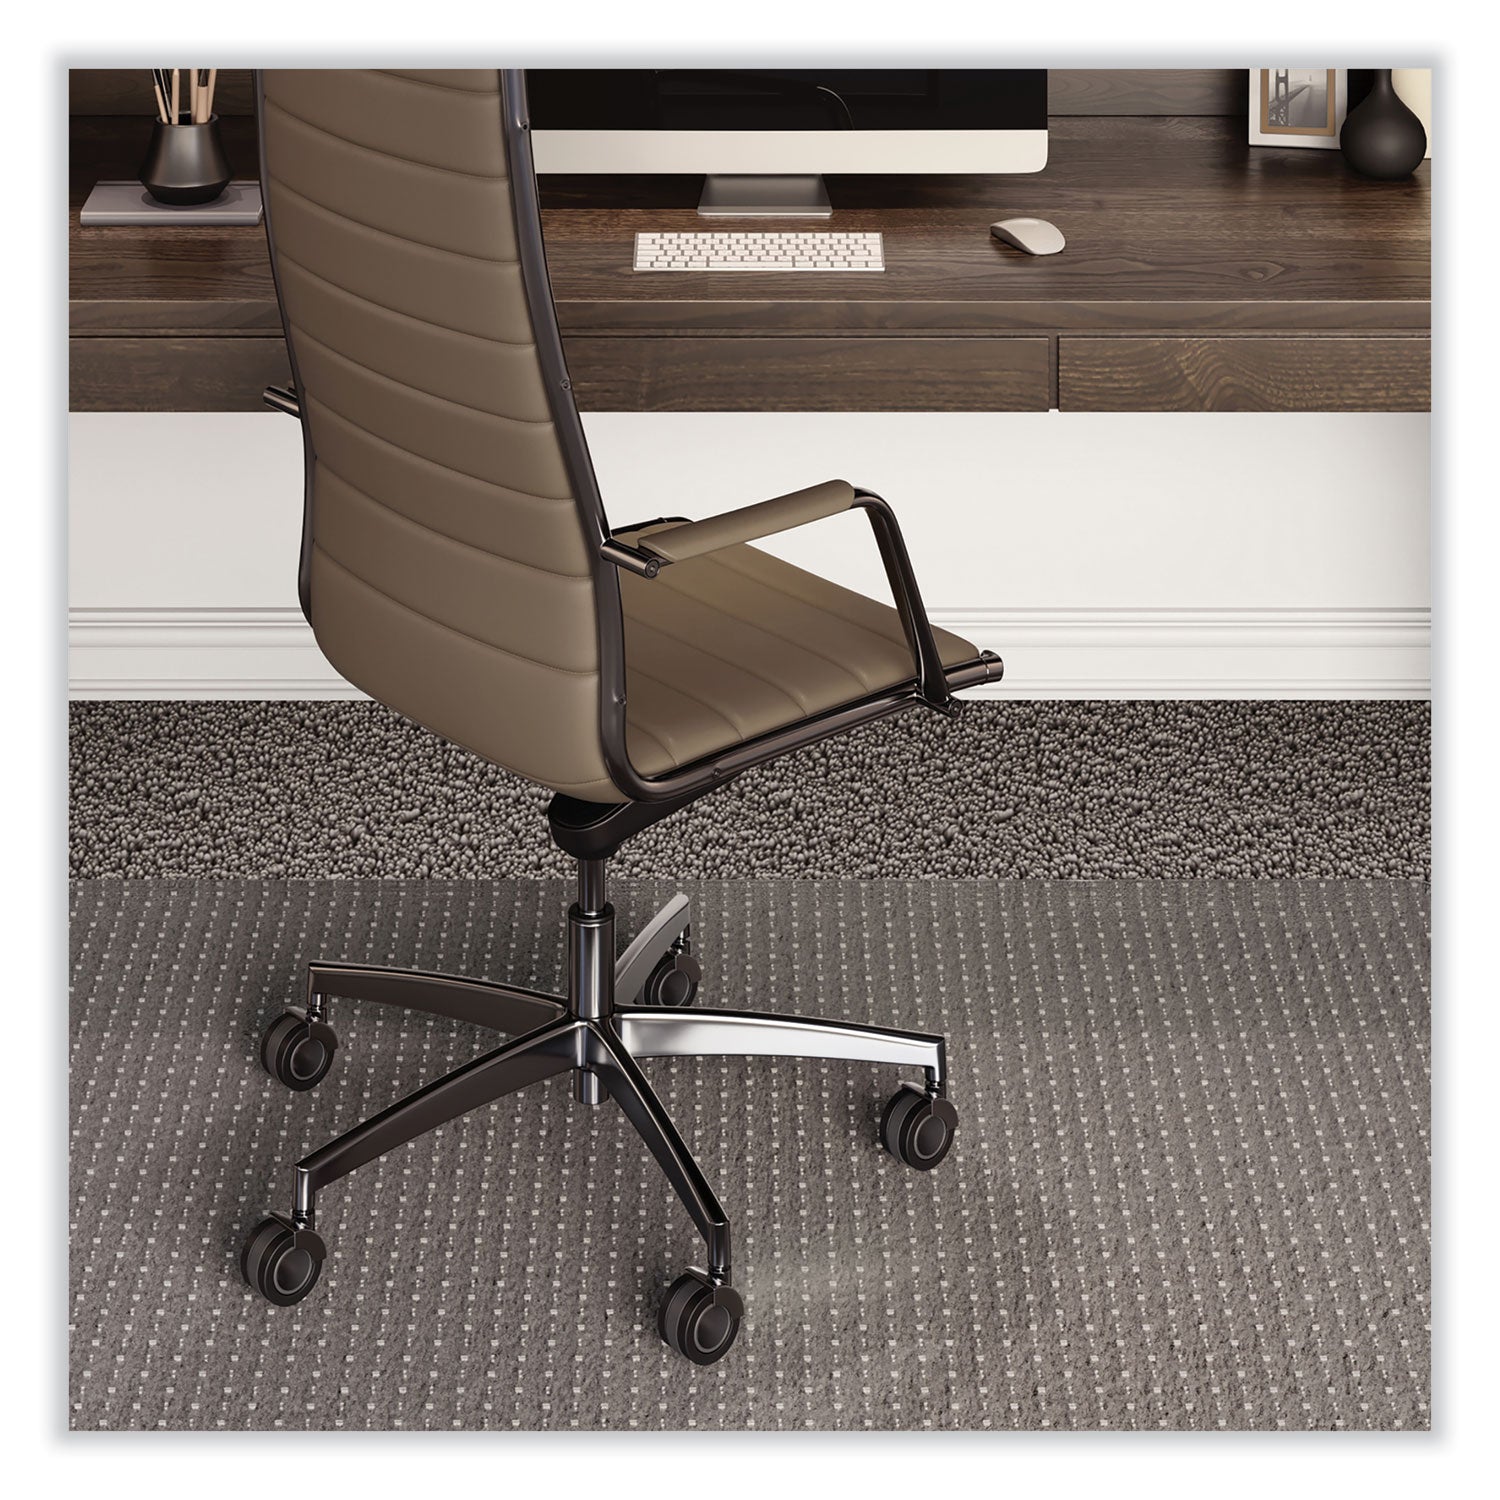 everlife-chair-mat-for-extra-high-pile-carpet-48-x-72-clear-ships-in-4-6-business-days_esr124481 - 8